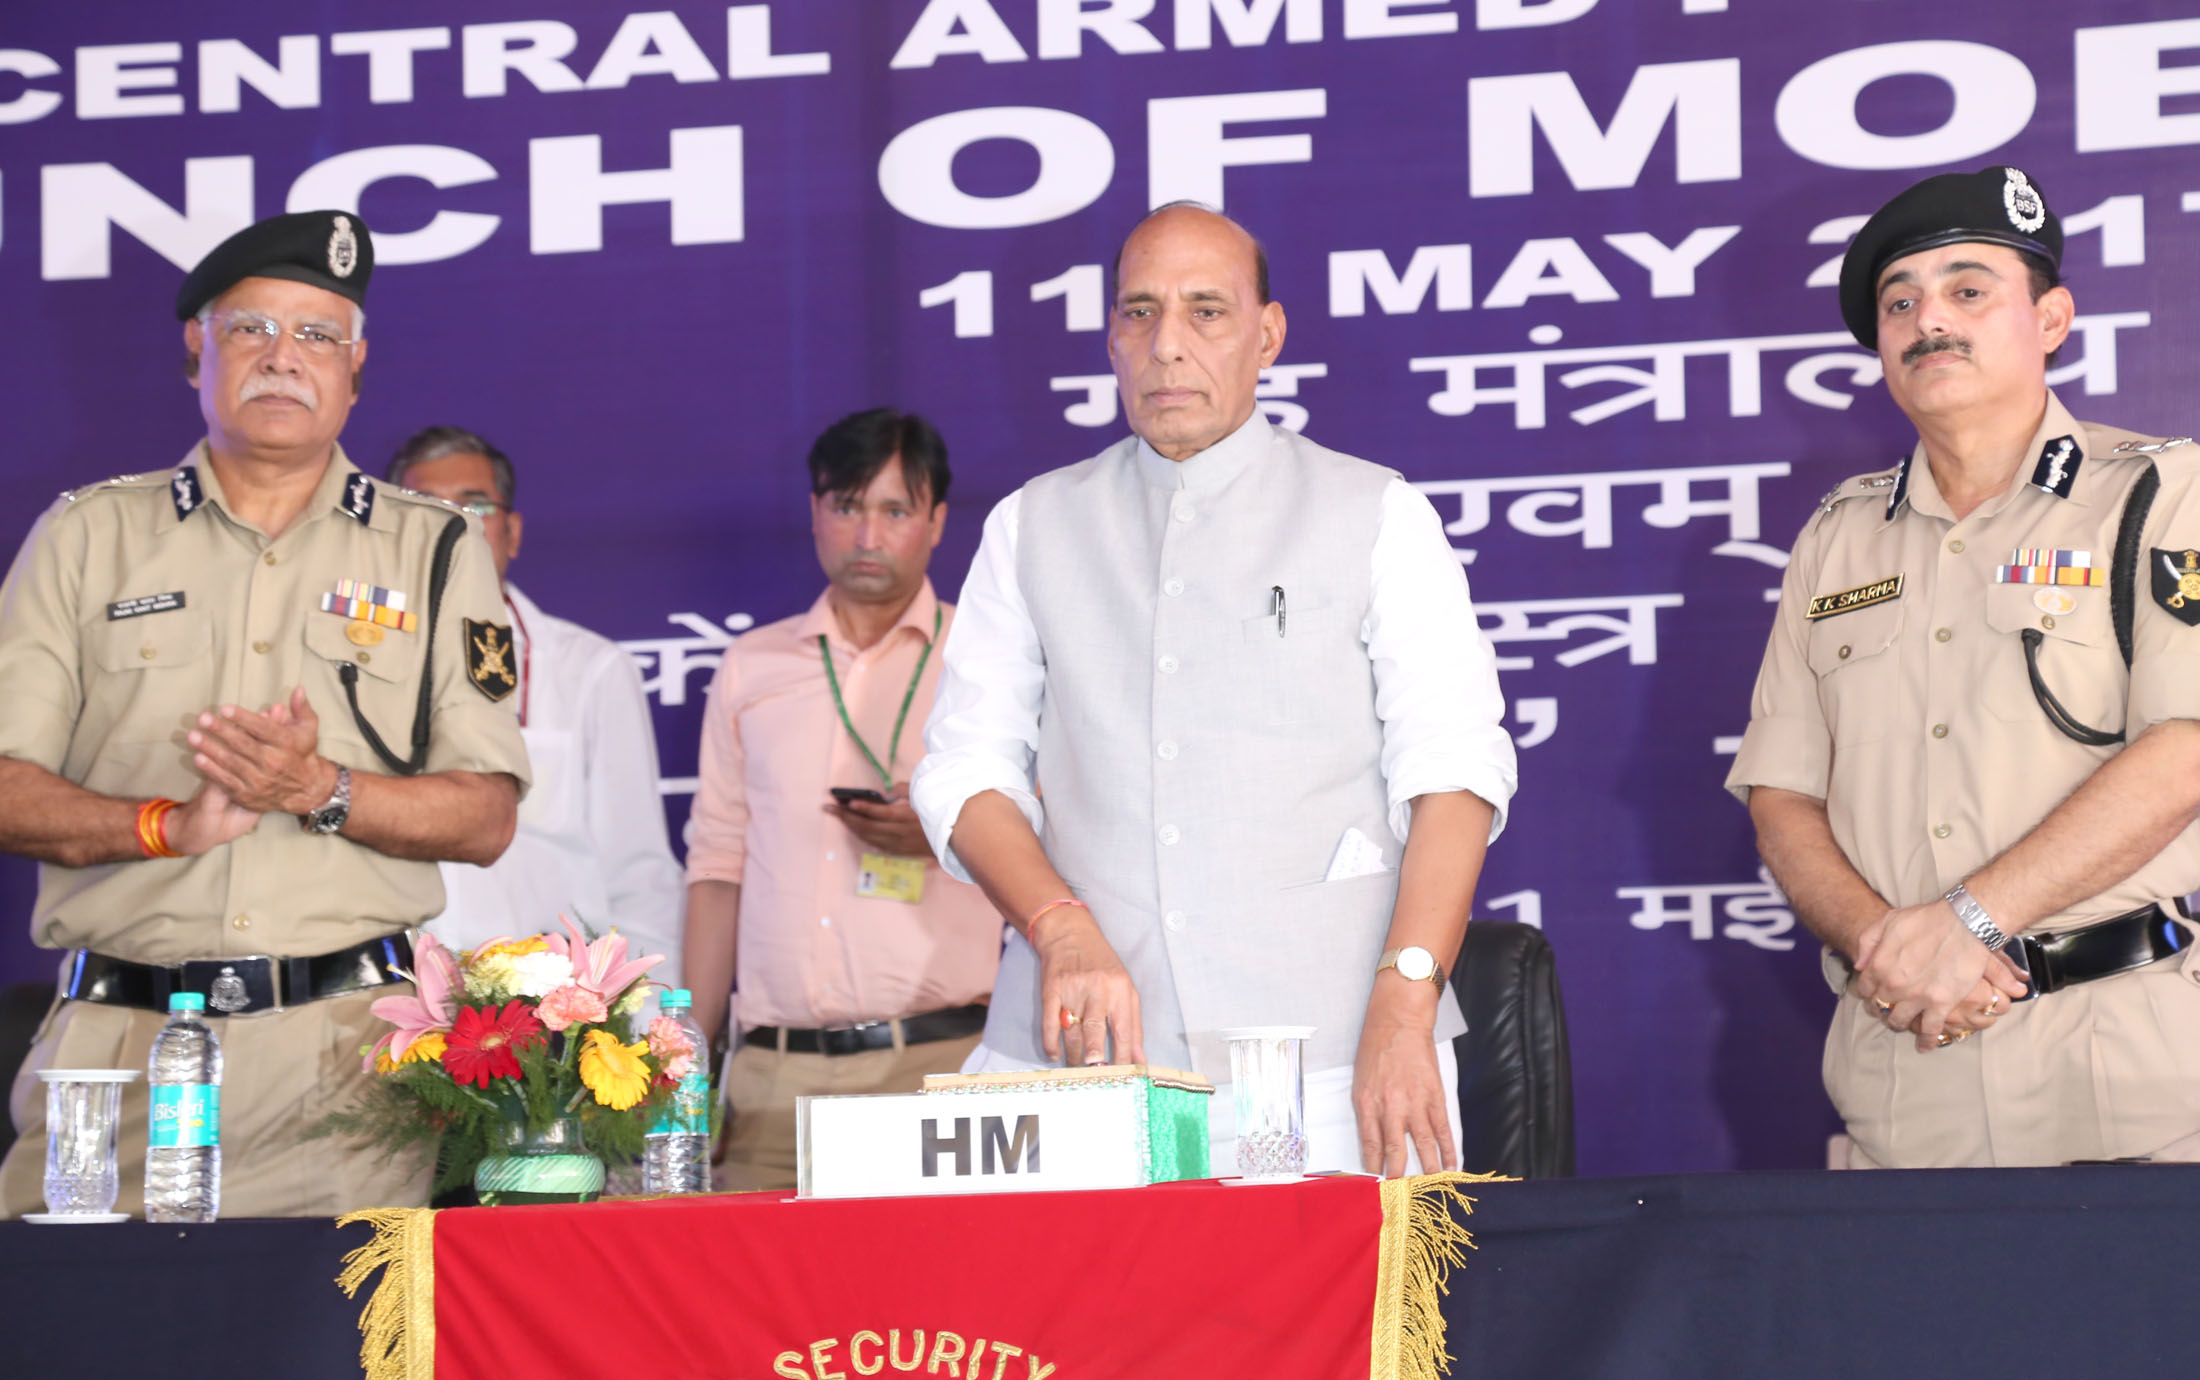 The Union Home Minister, Shri Rajnath Singh launching the BSFMyApp, in New Delhi on May 11, 2017.  The DG, BSF, Shri K. K. Sharma is also seen.